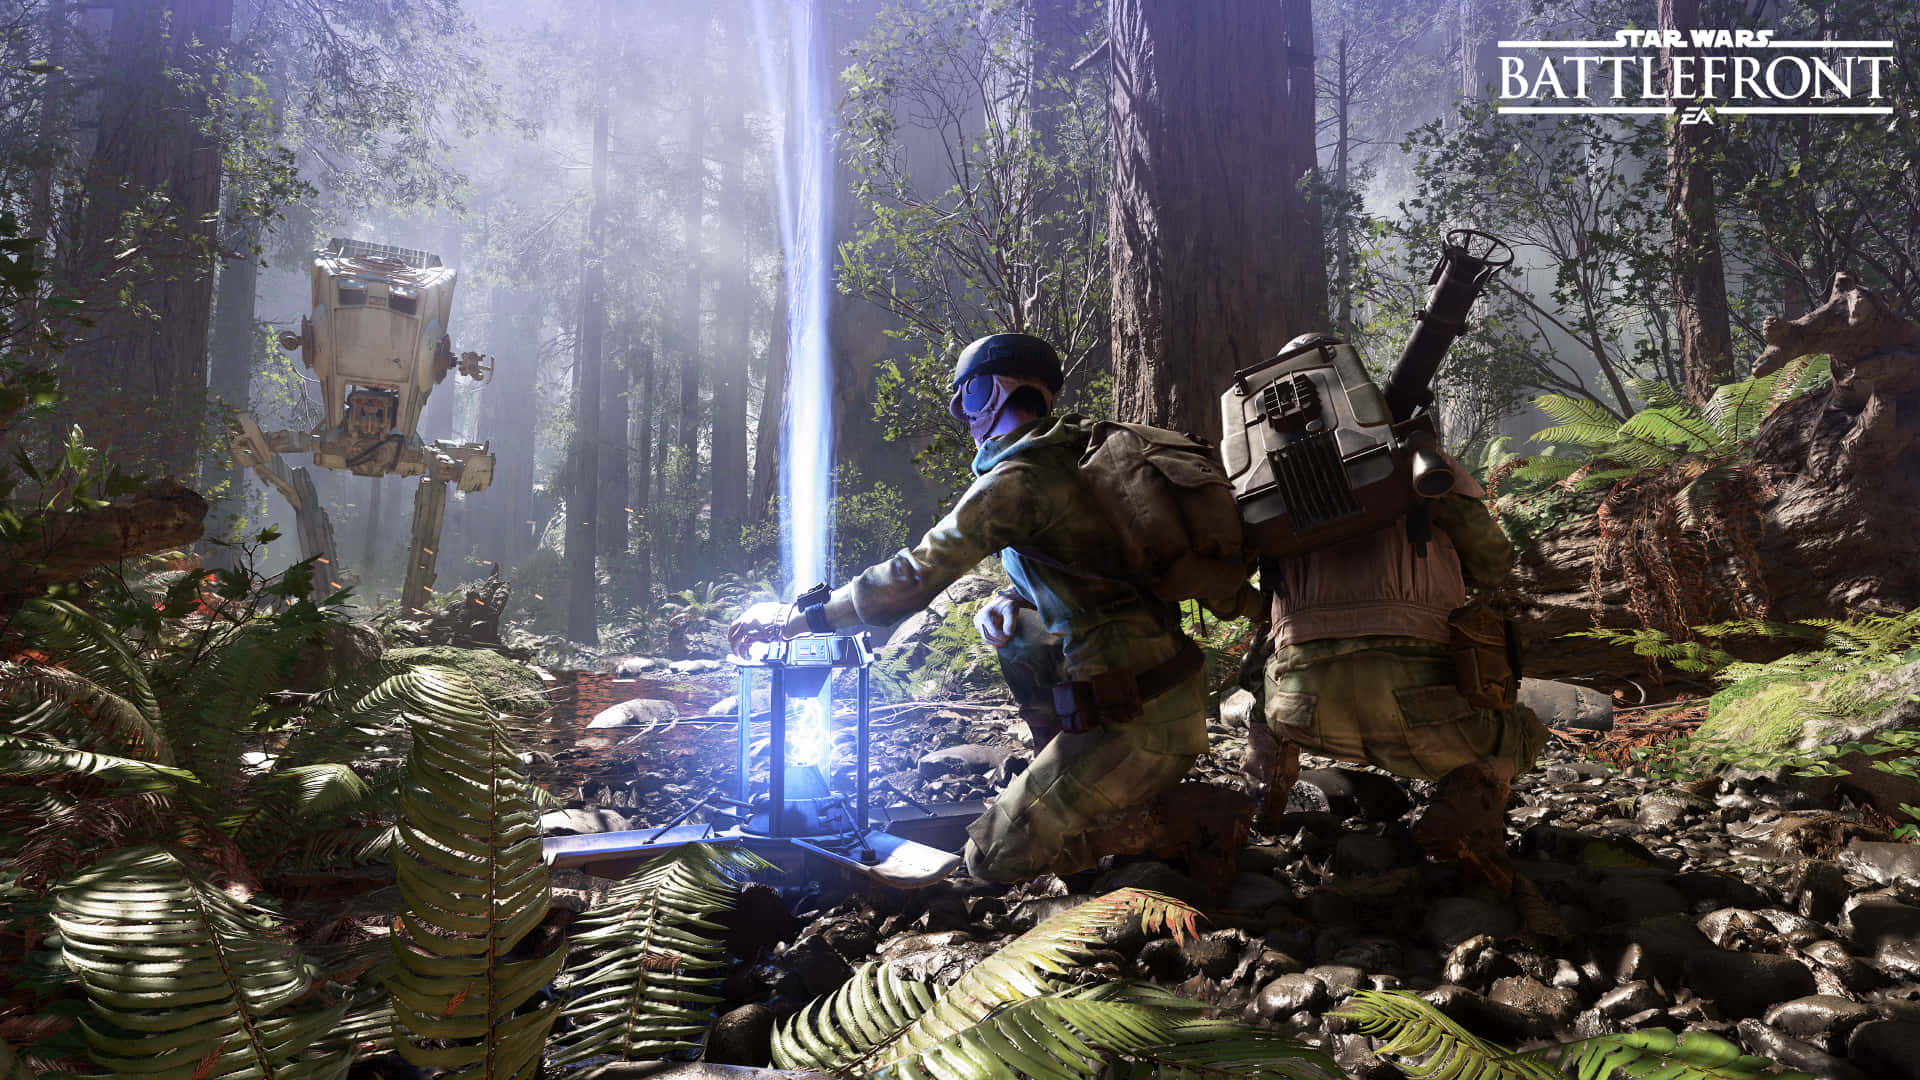 Imperial stormtroopers battle Rebel forces in intense Star Wars gaming action Wallpaper